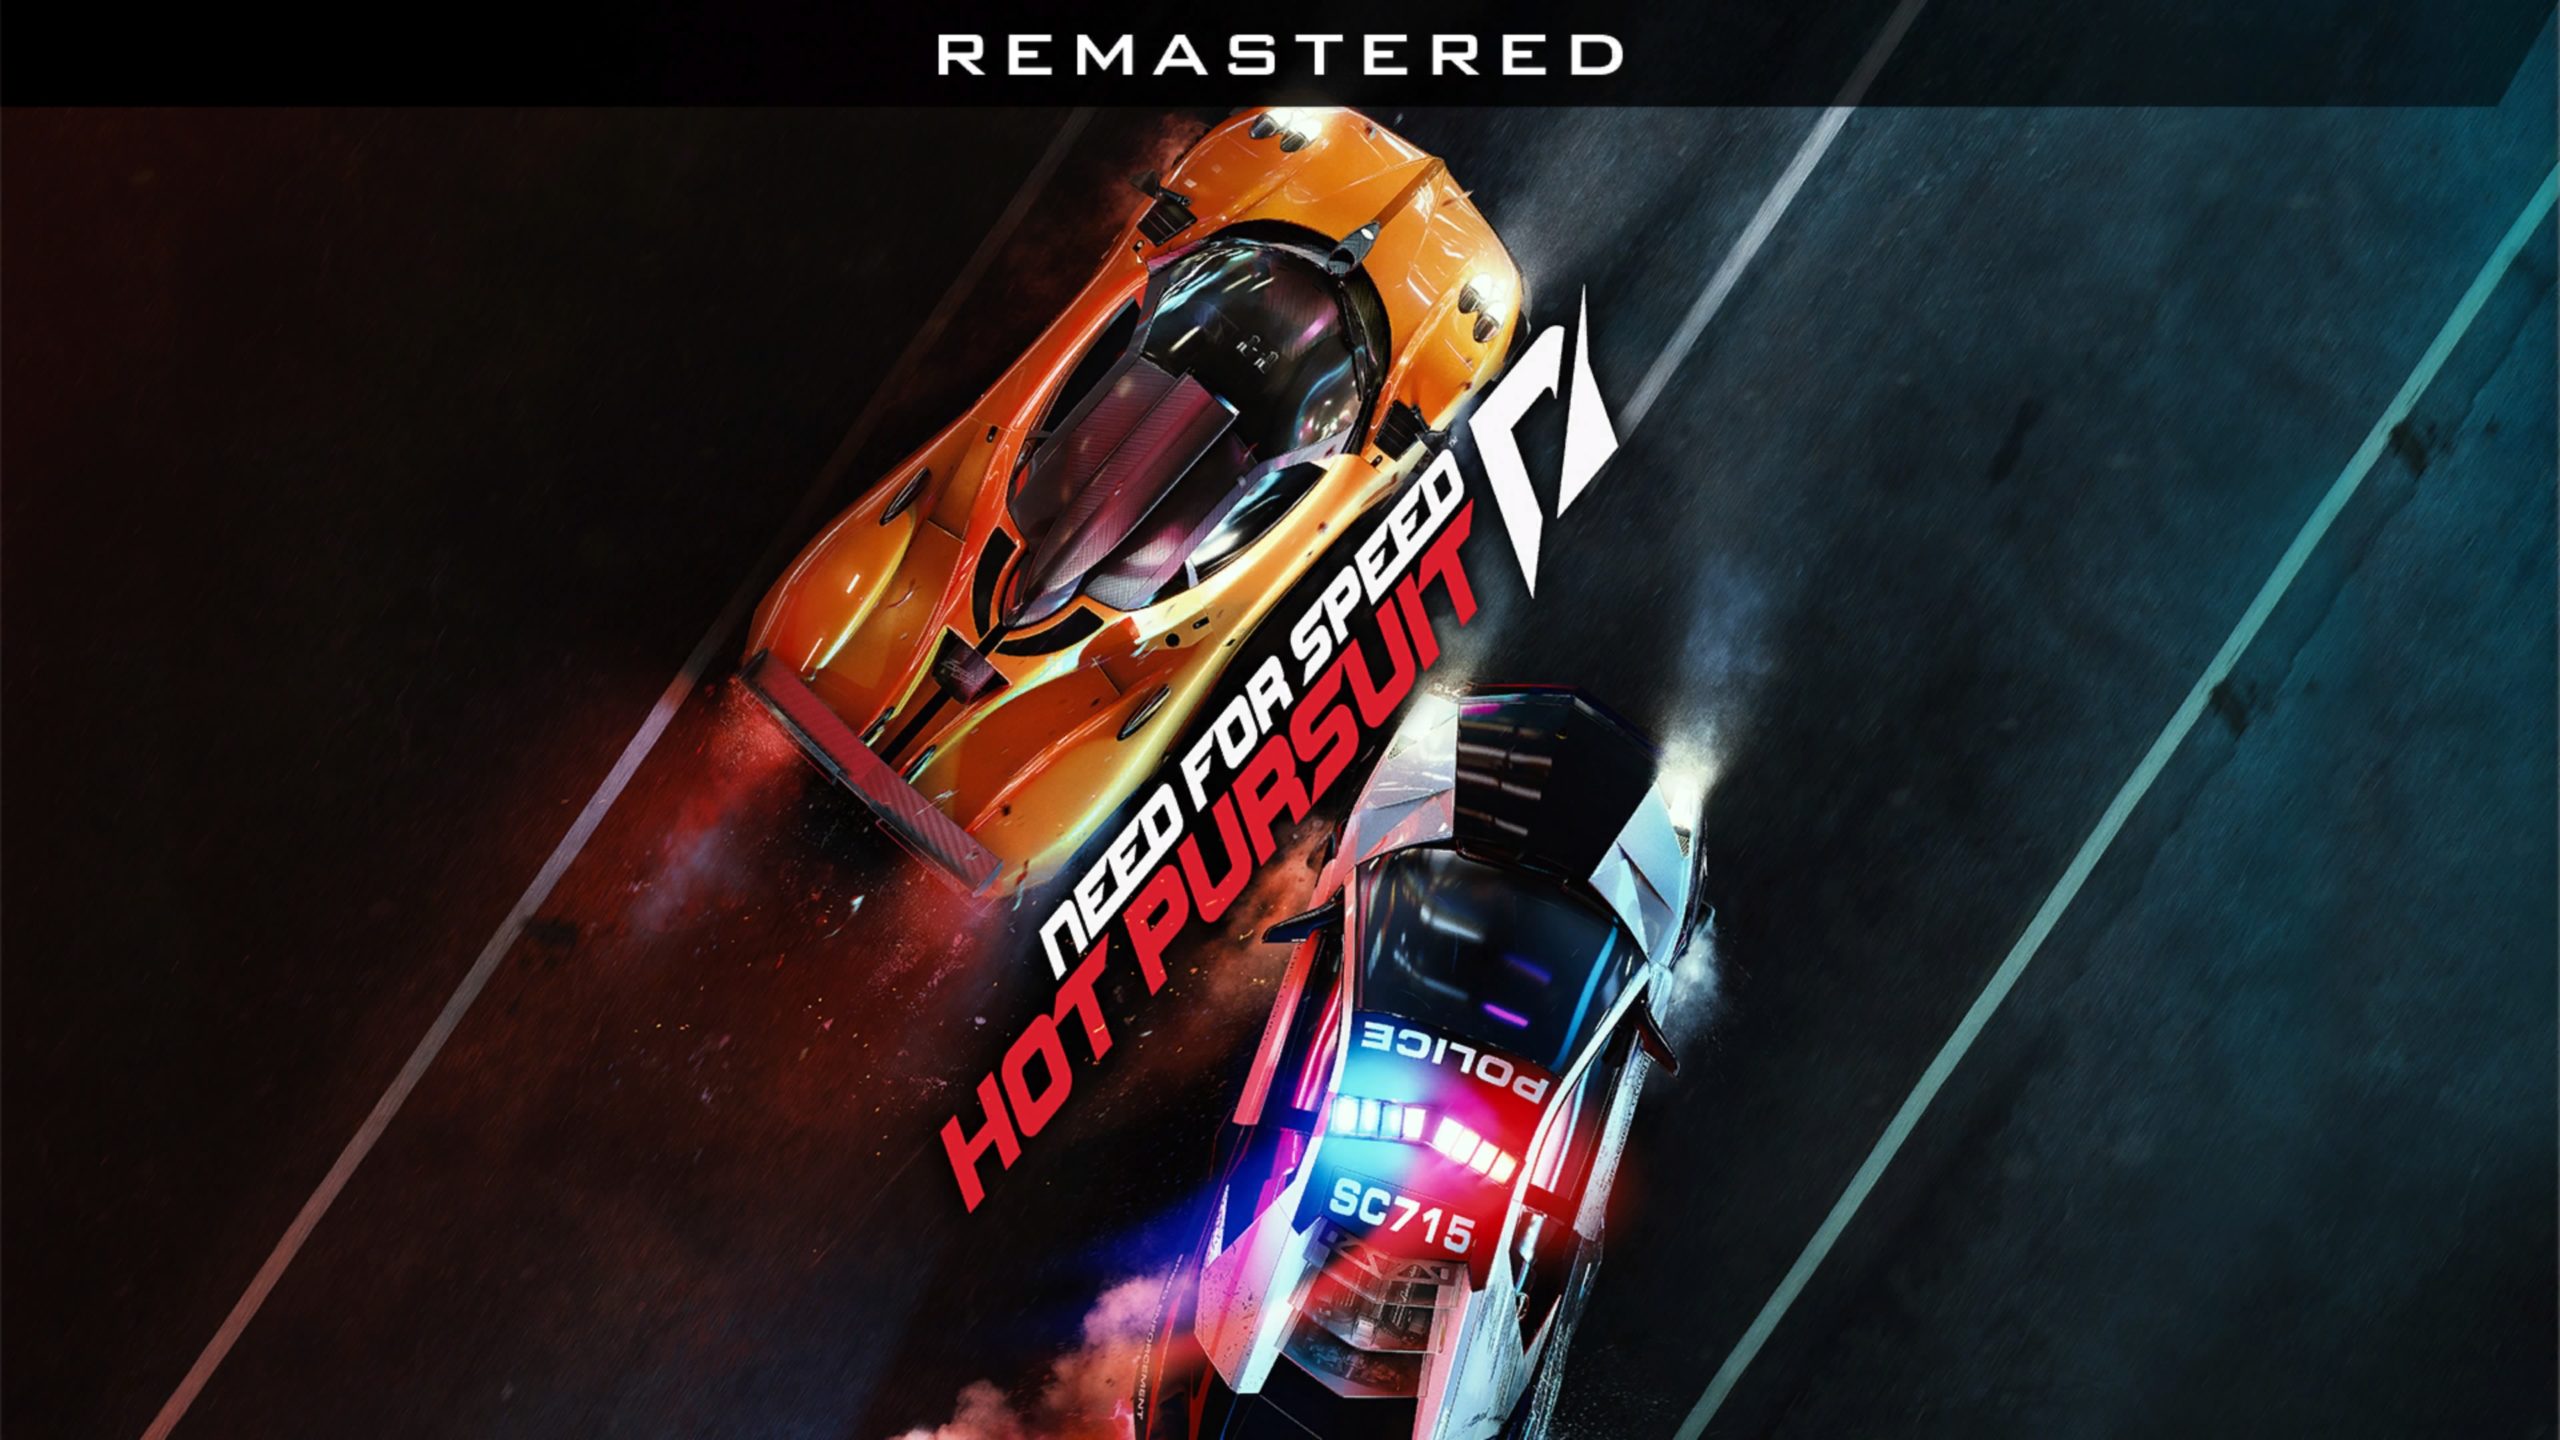 Speed Hot A Review Need Remastered Pursuit Update - Worthy For